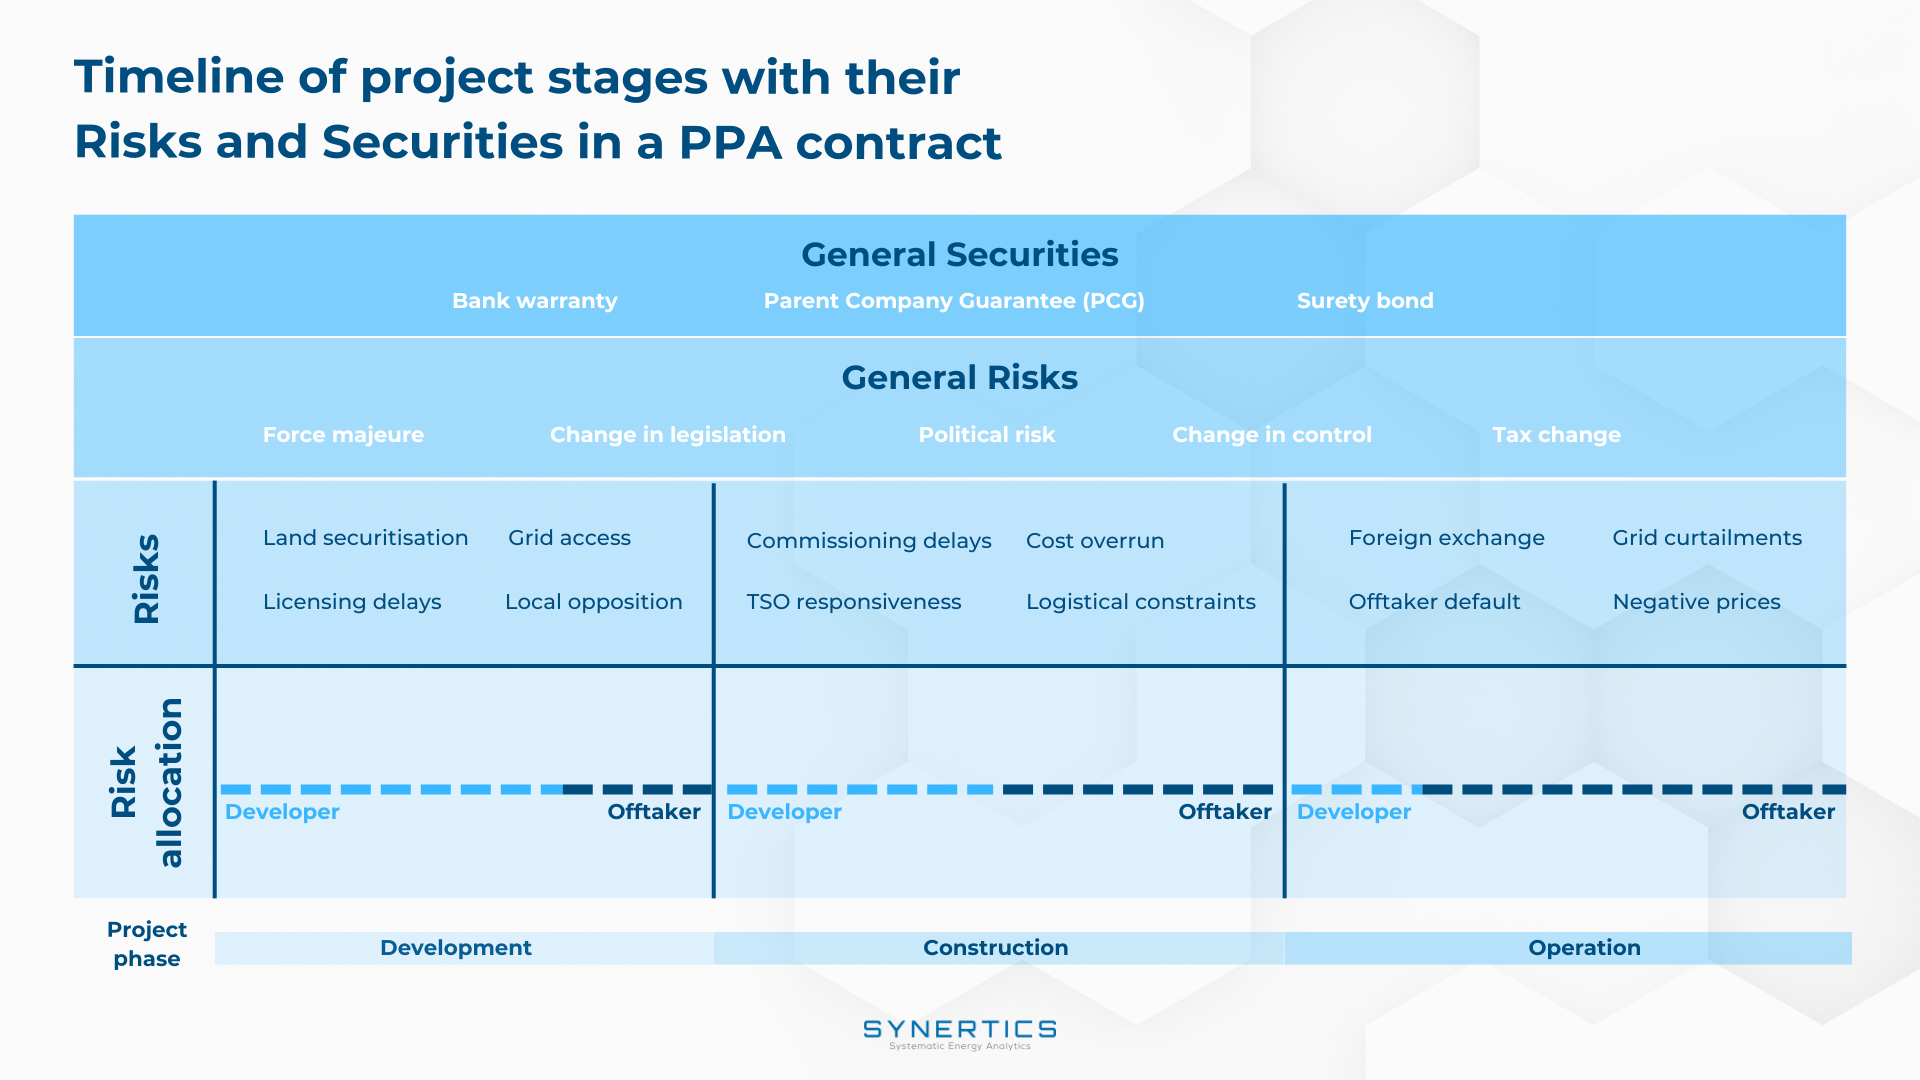 Timeline of project stages with their risks and securities in a PPA contract